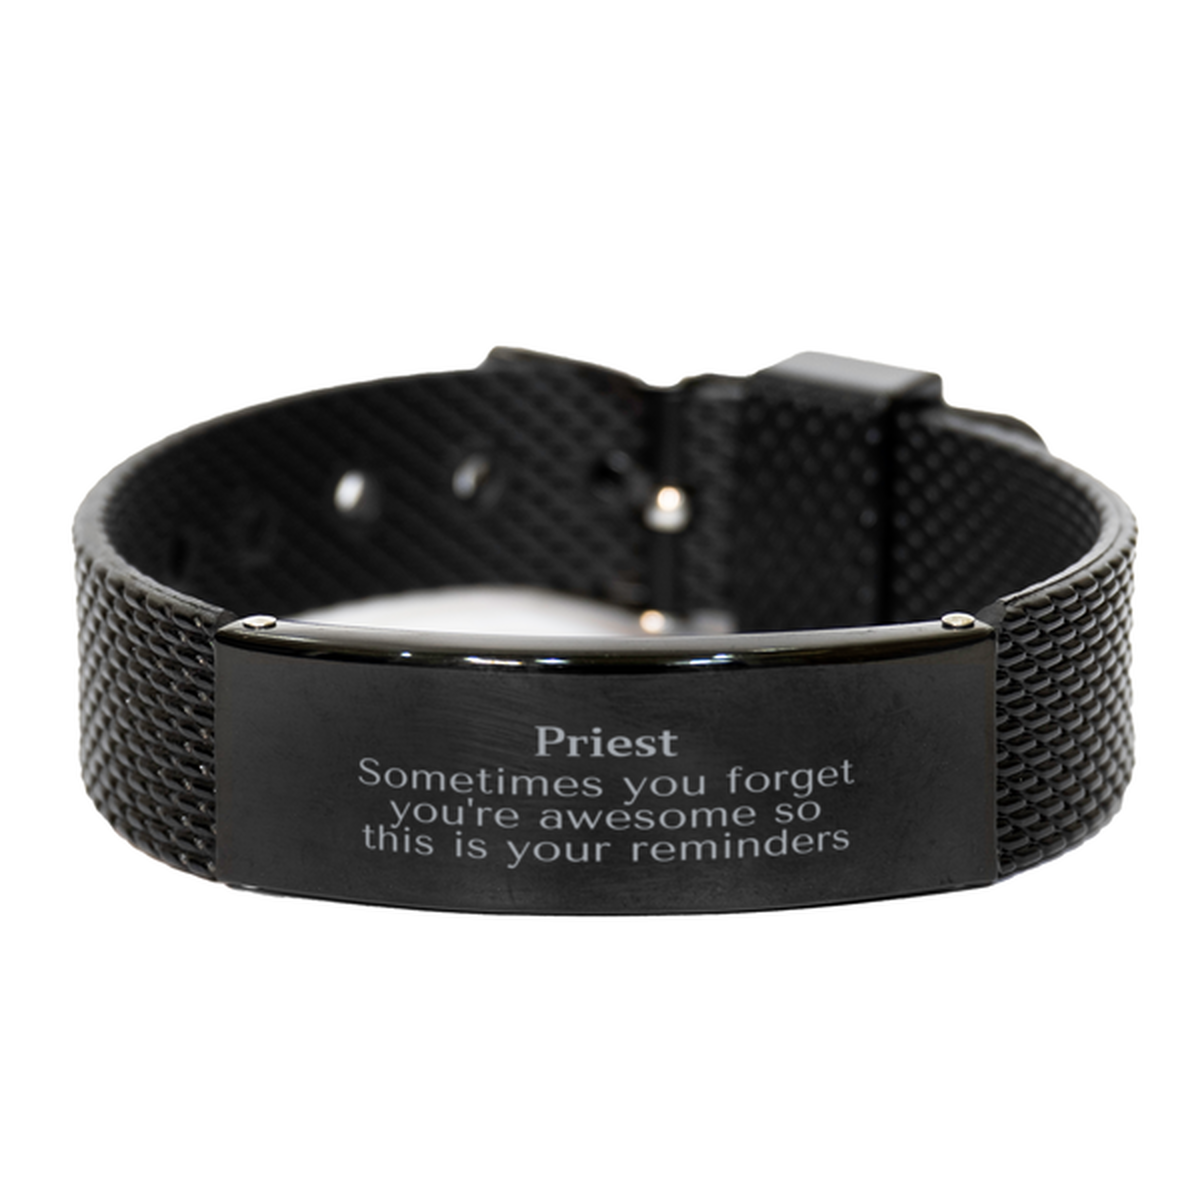 Sentimental Priest Black Shark Mesh Bracelet, Priest Sometimes you forget you're awesome so this is your reminders, Graduation Christmas Birthday Gifts for Priest, Men, Women, Coworkers